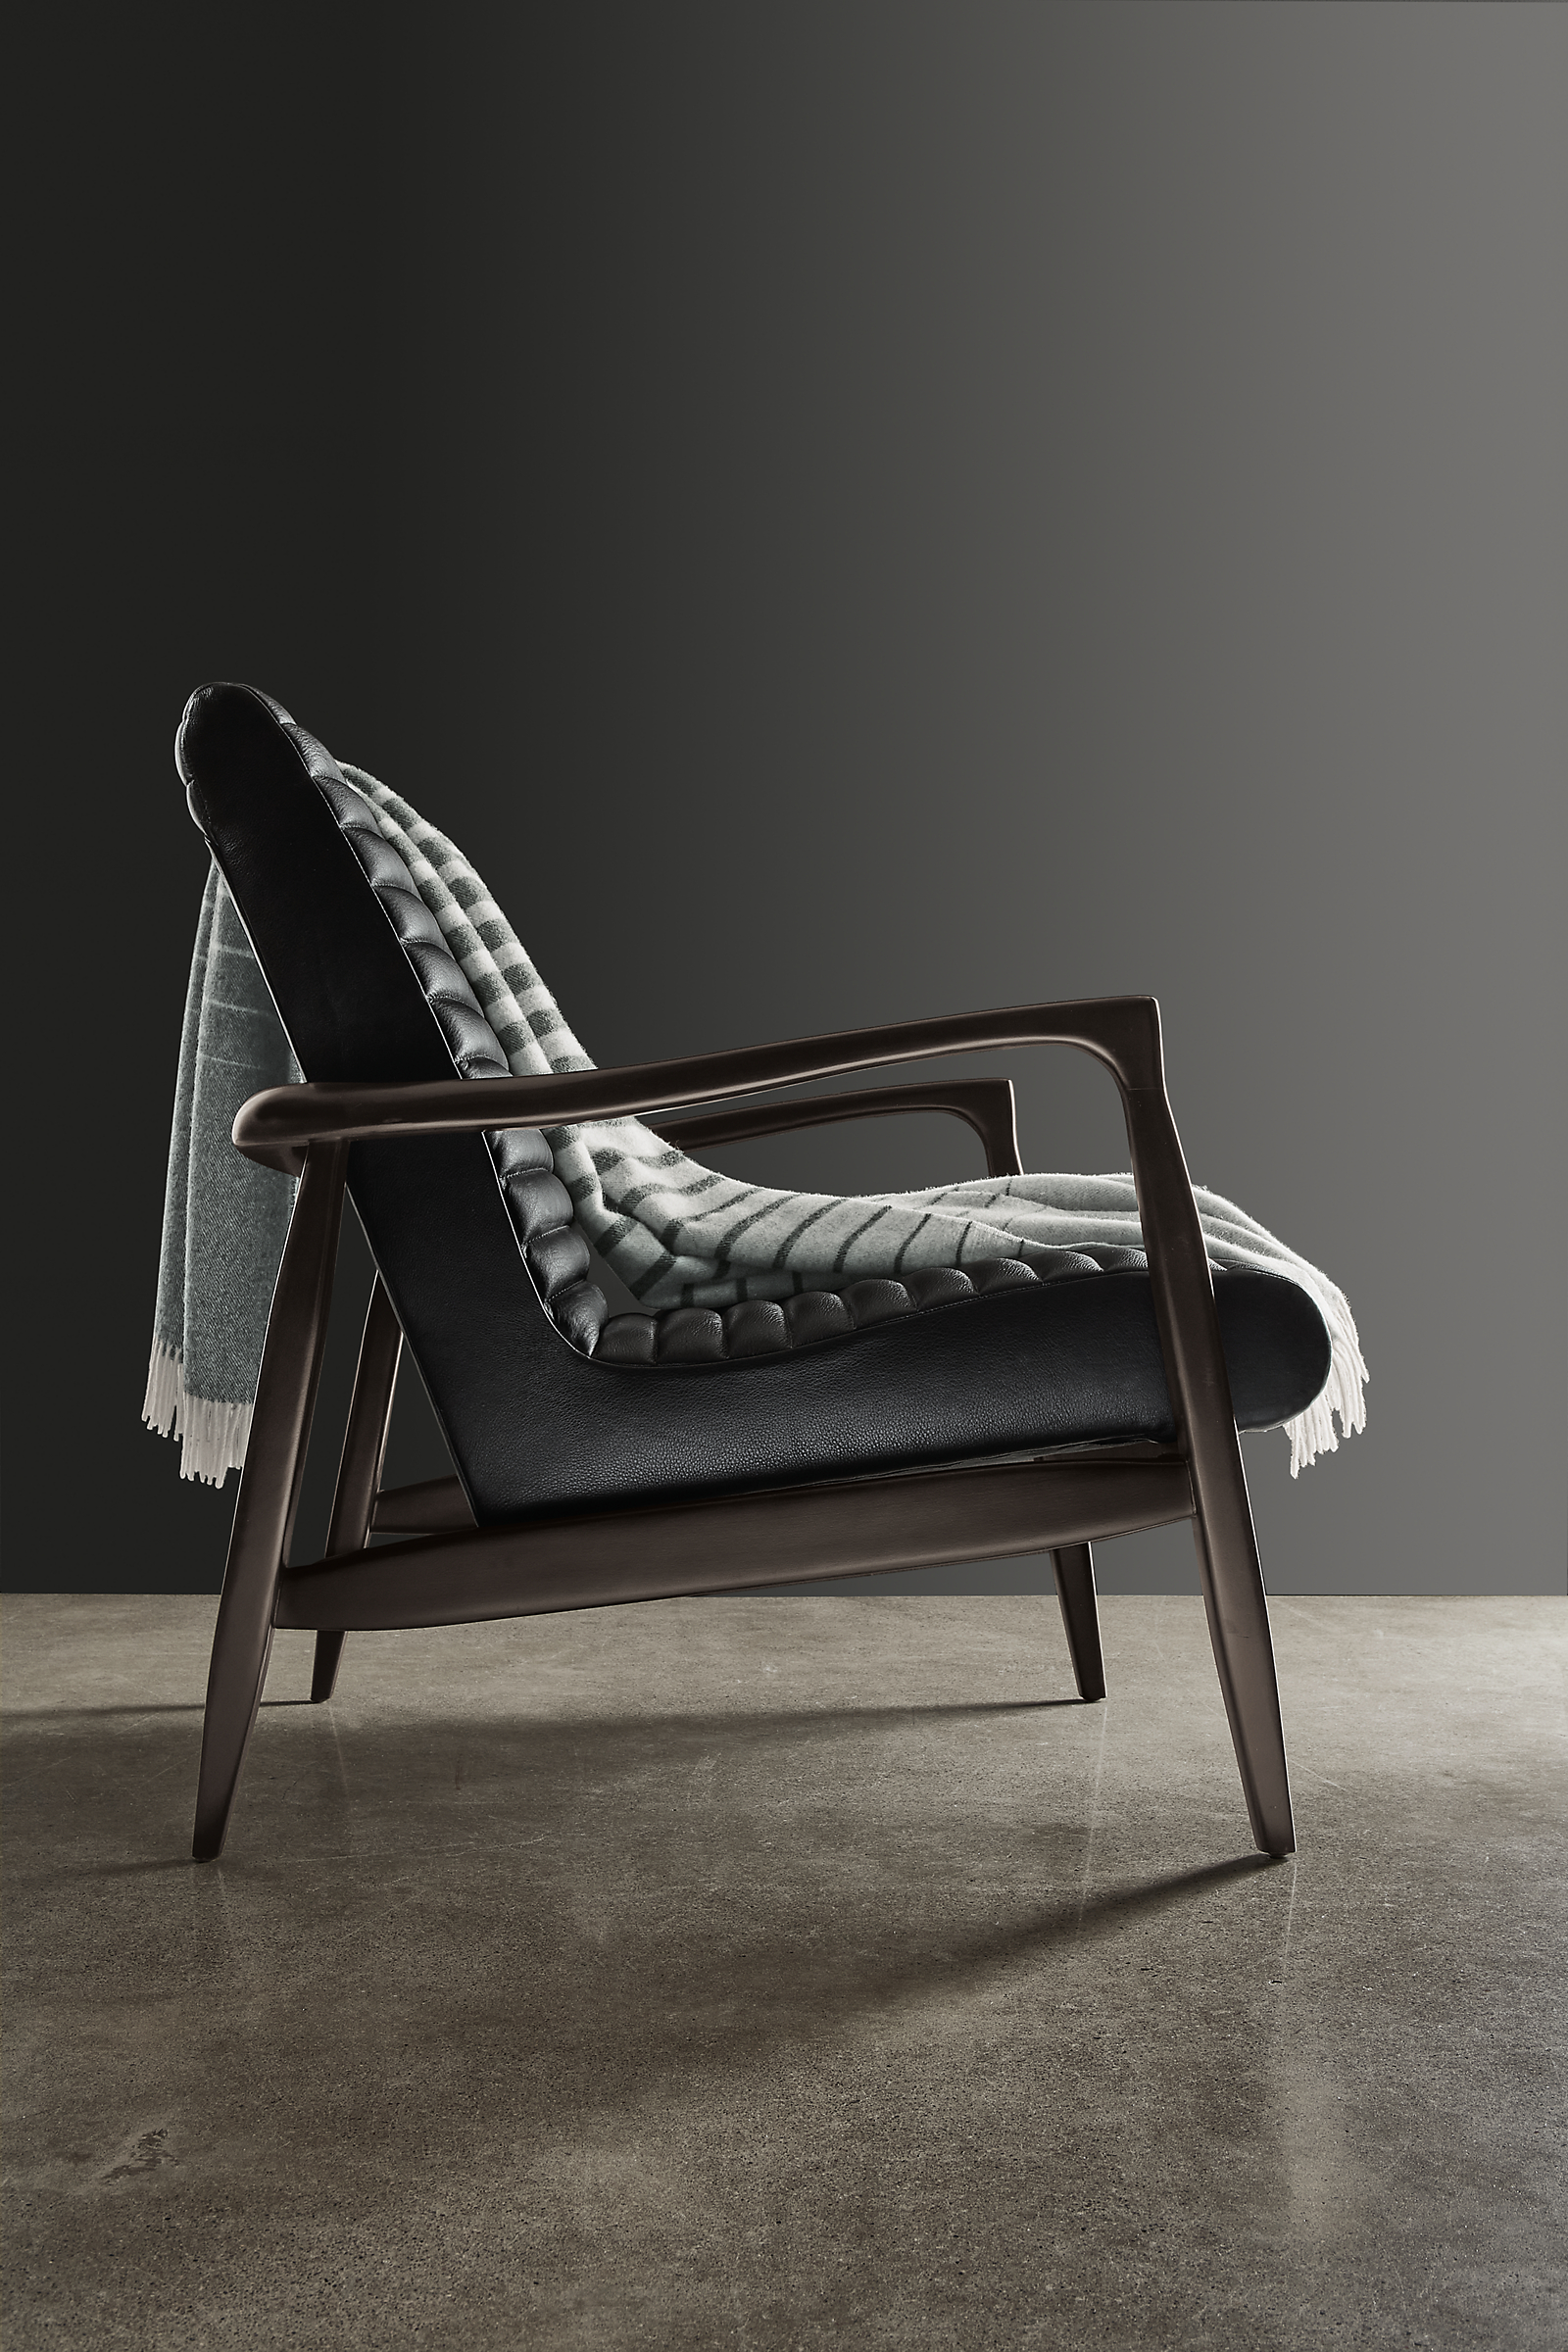 detail of callan chair in urbino black leather and black wood.